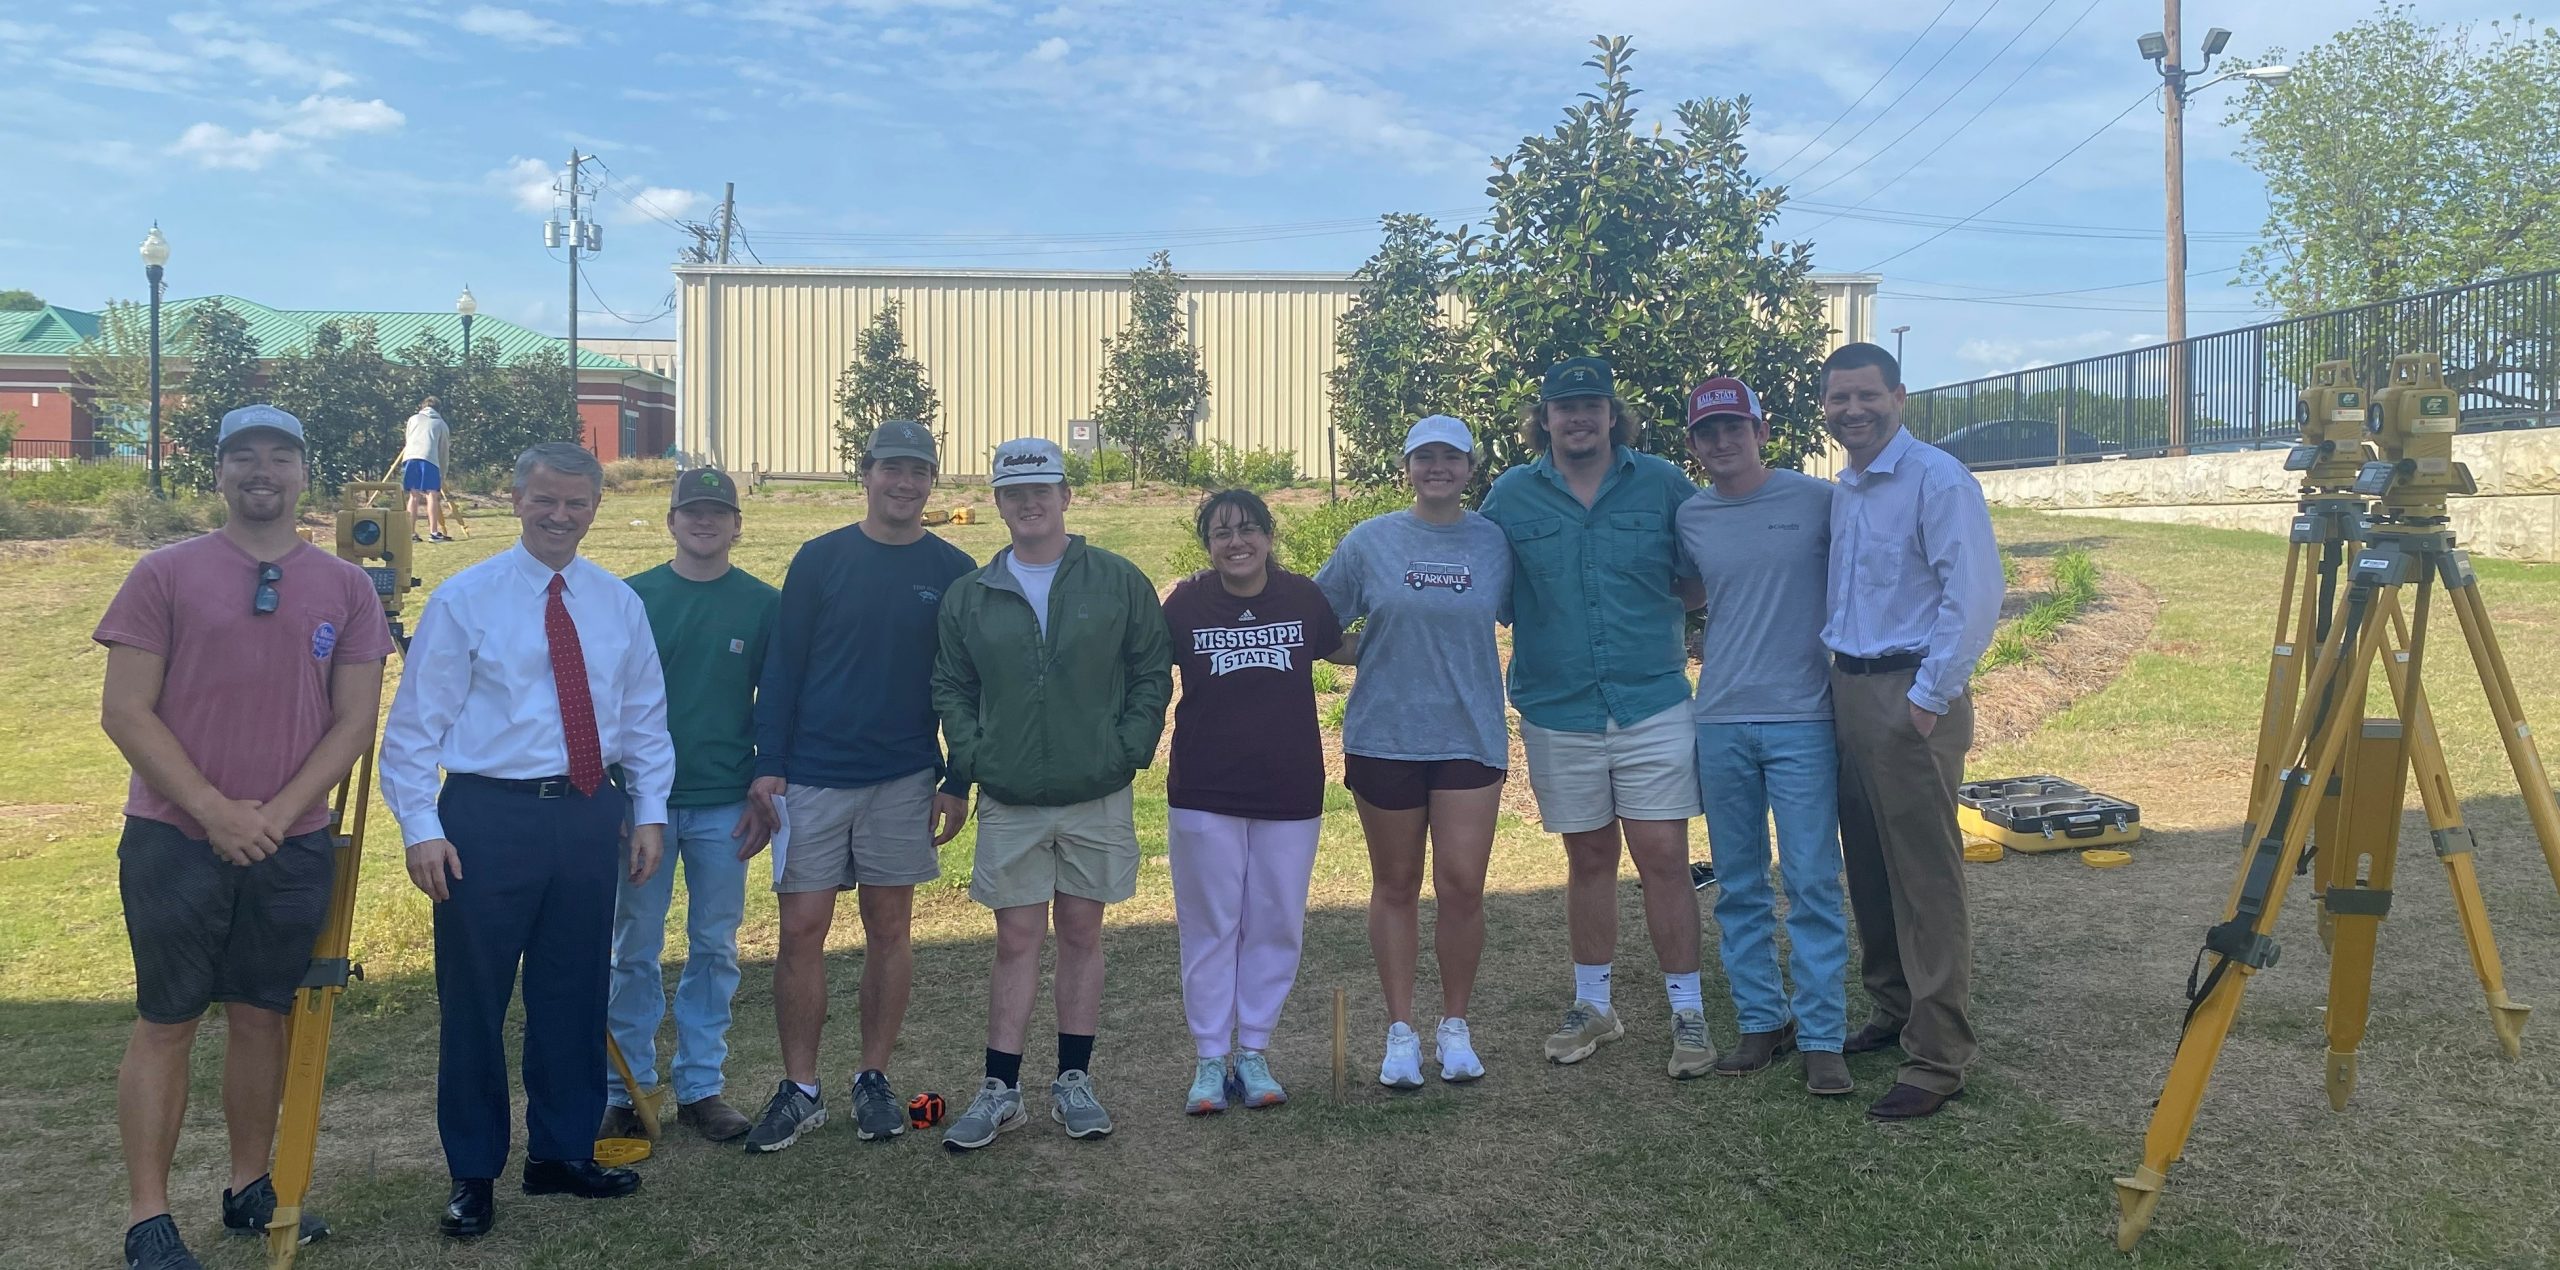 (2022) Dr. David Pittman, ERDC Director and Engineering Distinguished Fellow, Campus Visit and Student Interactions – Starkville, MS